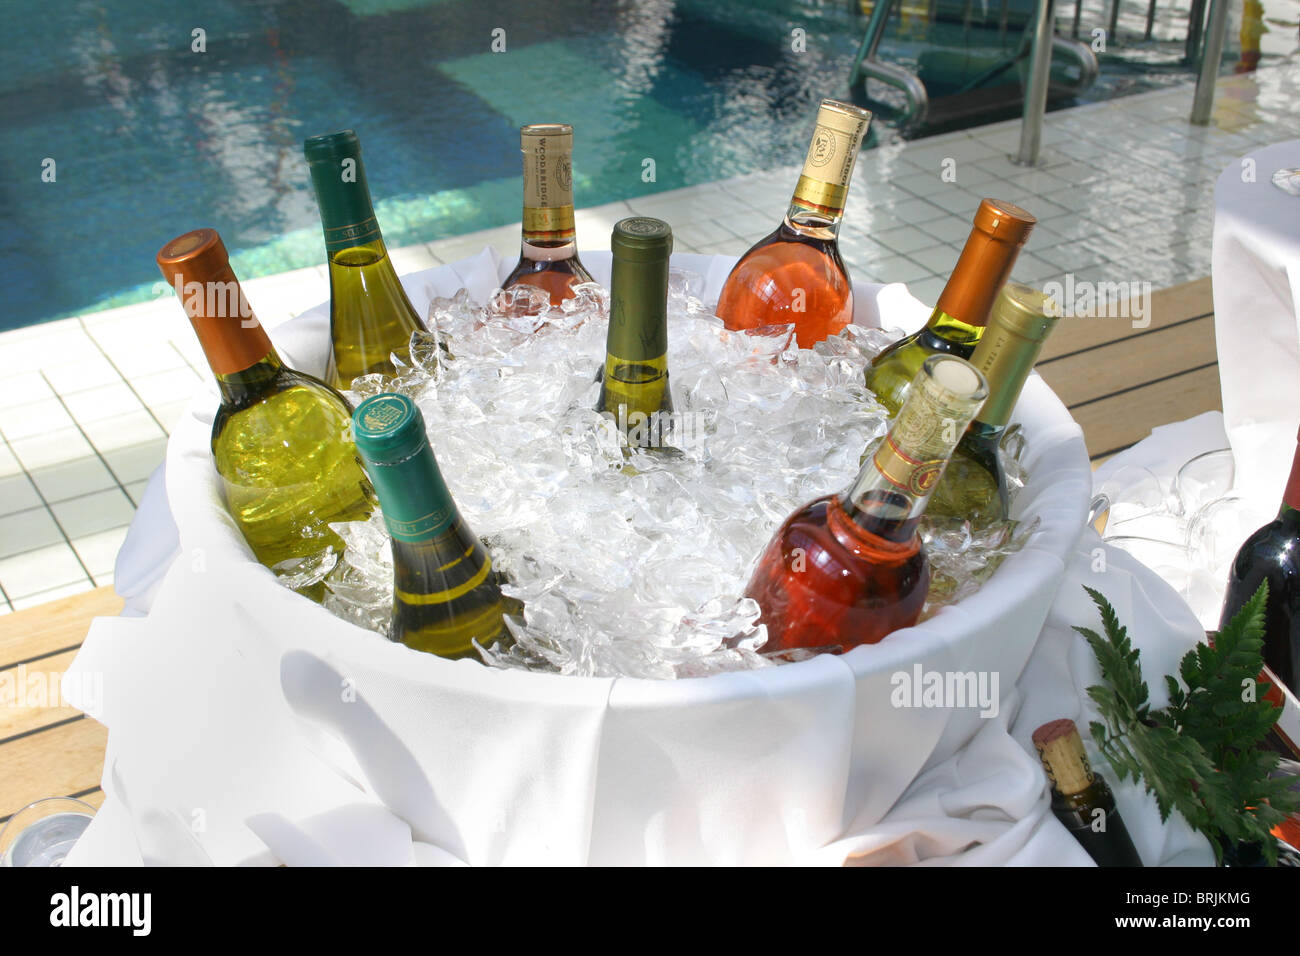 Wine bottles in a wine bucket full of ice, representing a variety of special wines from around the world. Stock Photo